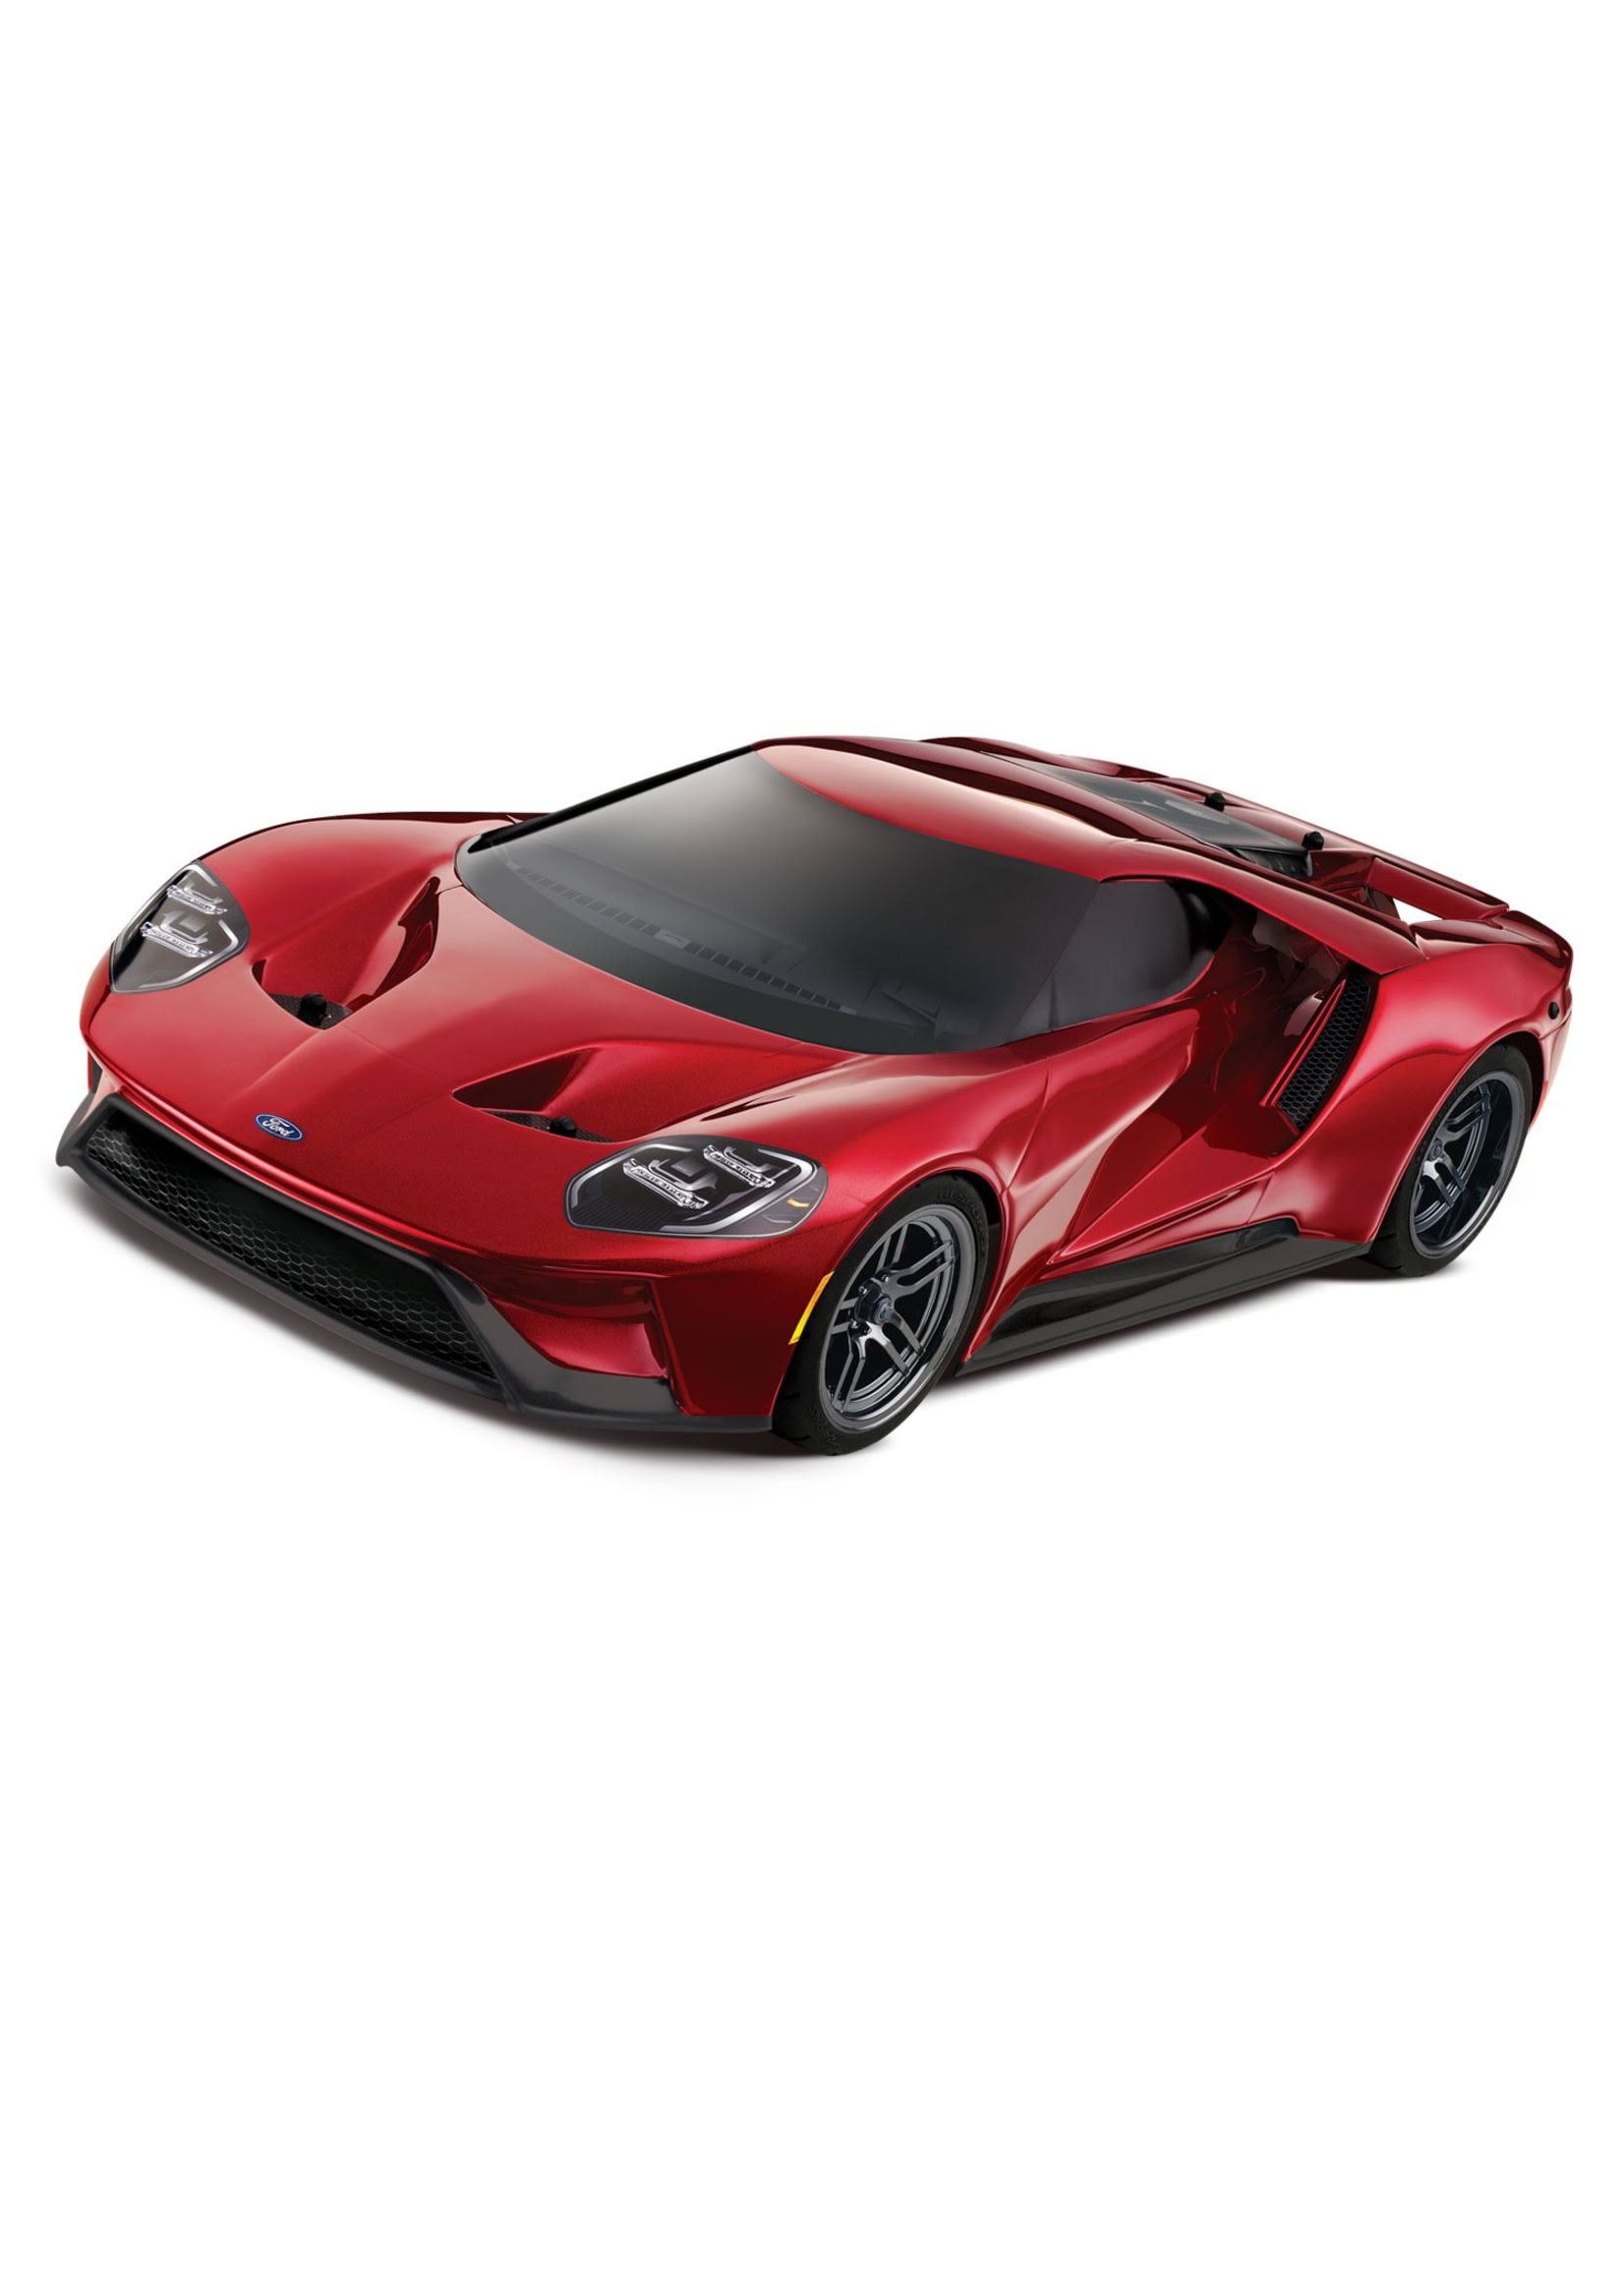 Traxxas Ford GT Awd Supercar RTR Car Model Kit - Red, 1:10 Scale